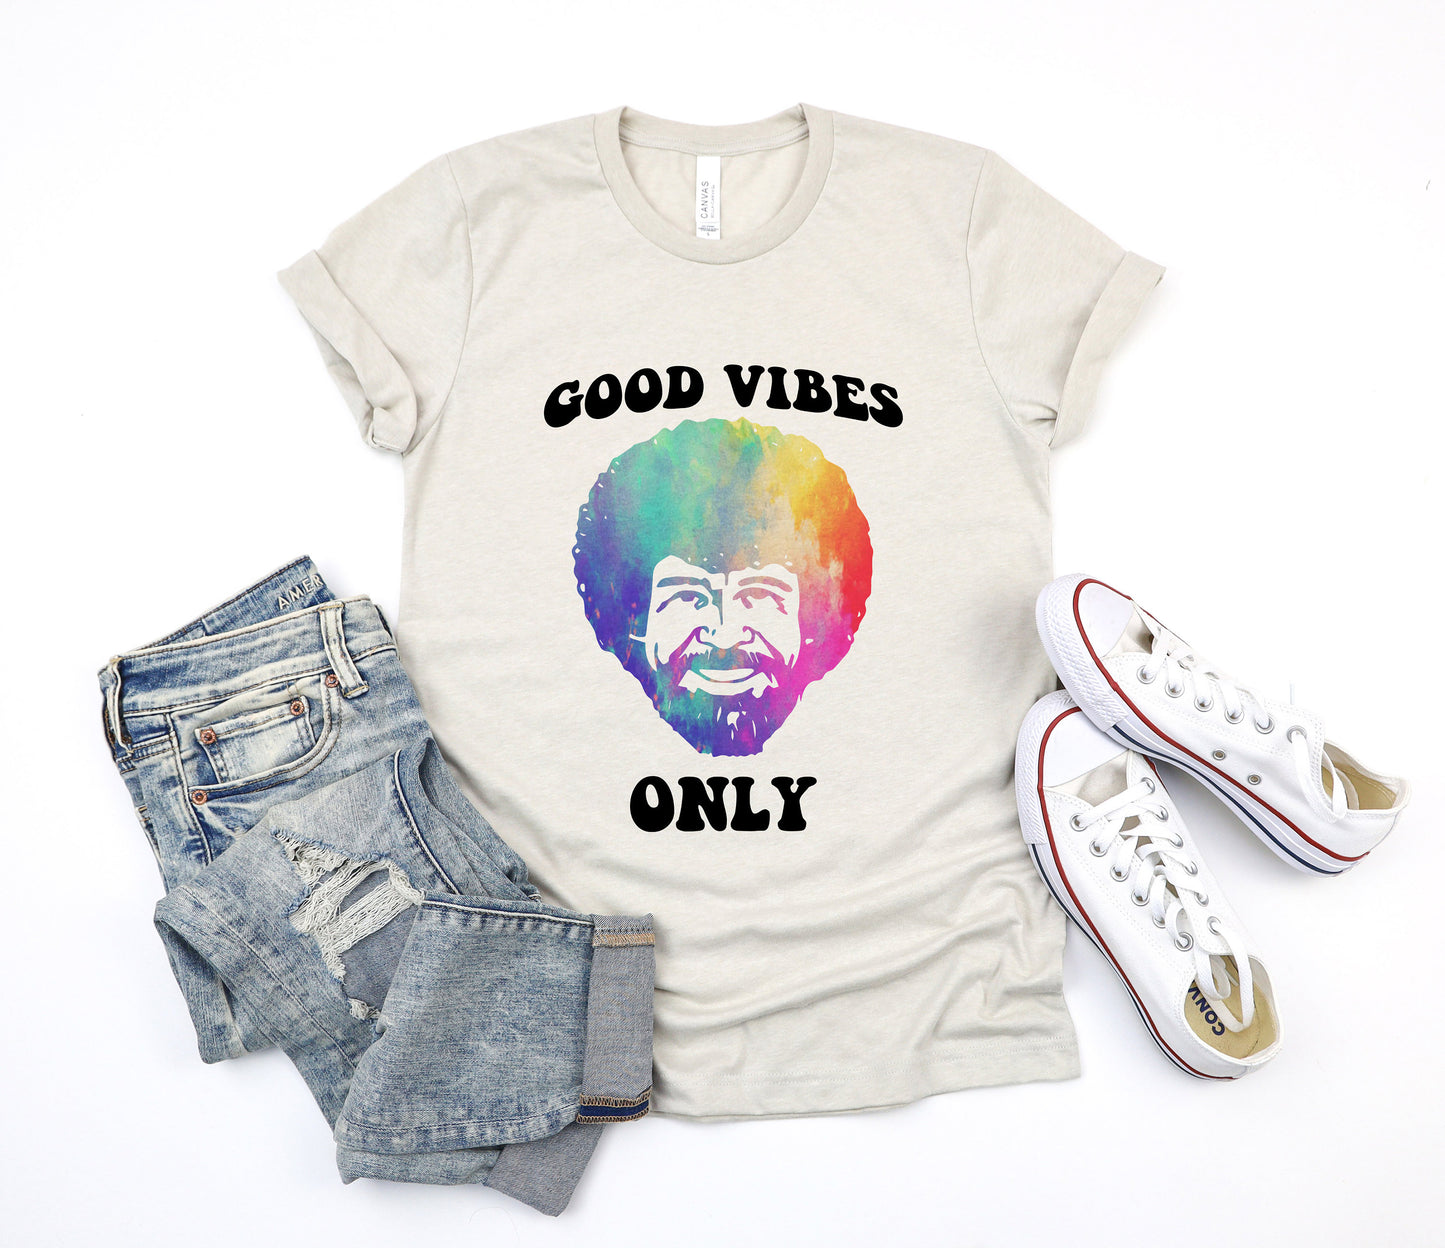 Bob Ross Happy Little Trees Painter Good Vibes Only Retro Boho Hippie Style Ultra Soft Graphic Tee Unisex Soft Tee T-shirt for Women or Men